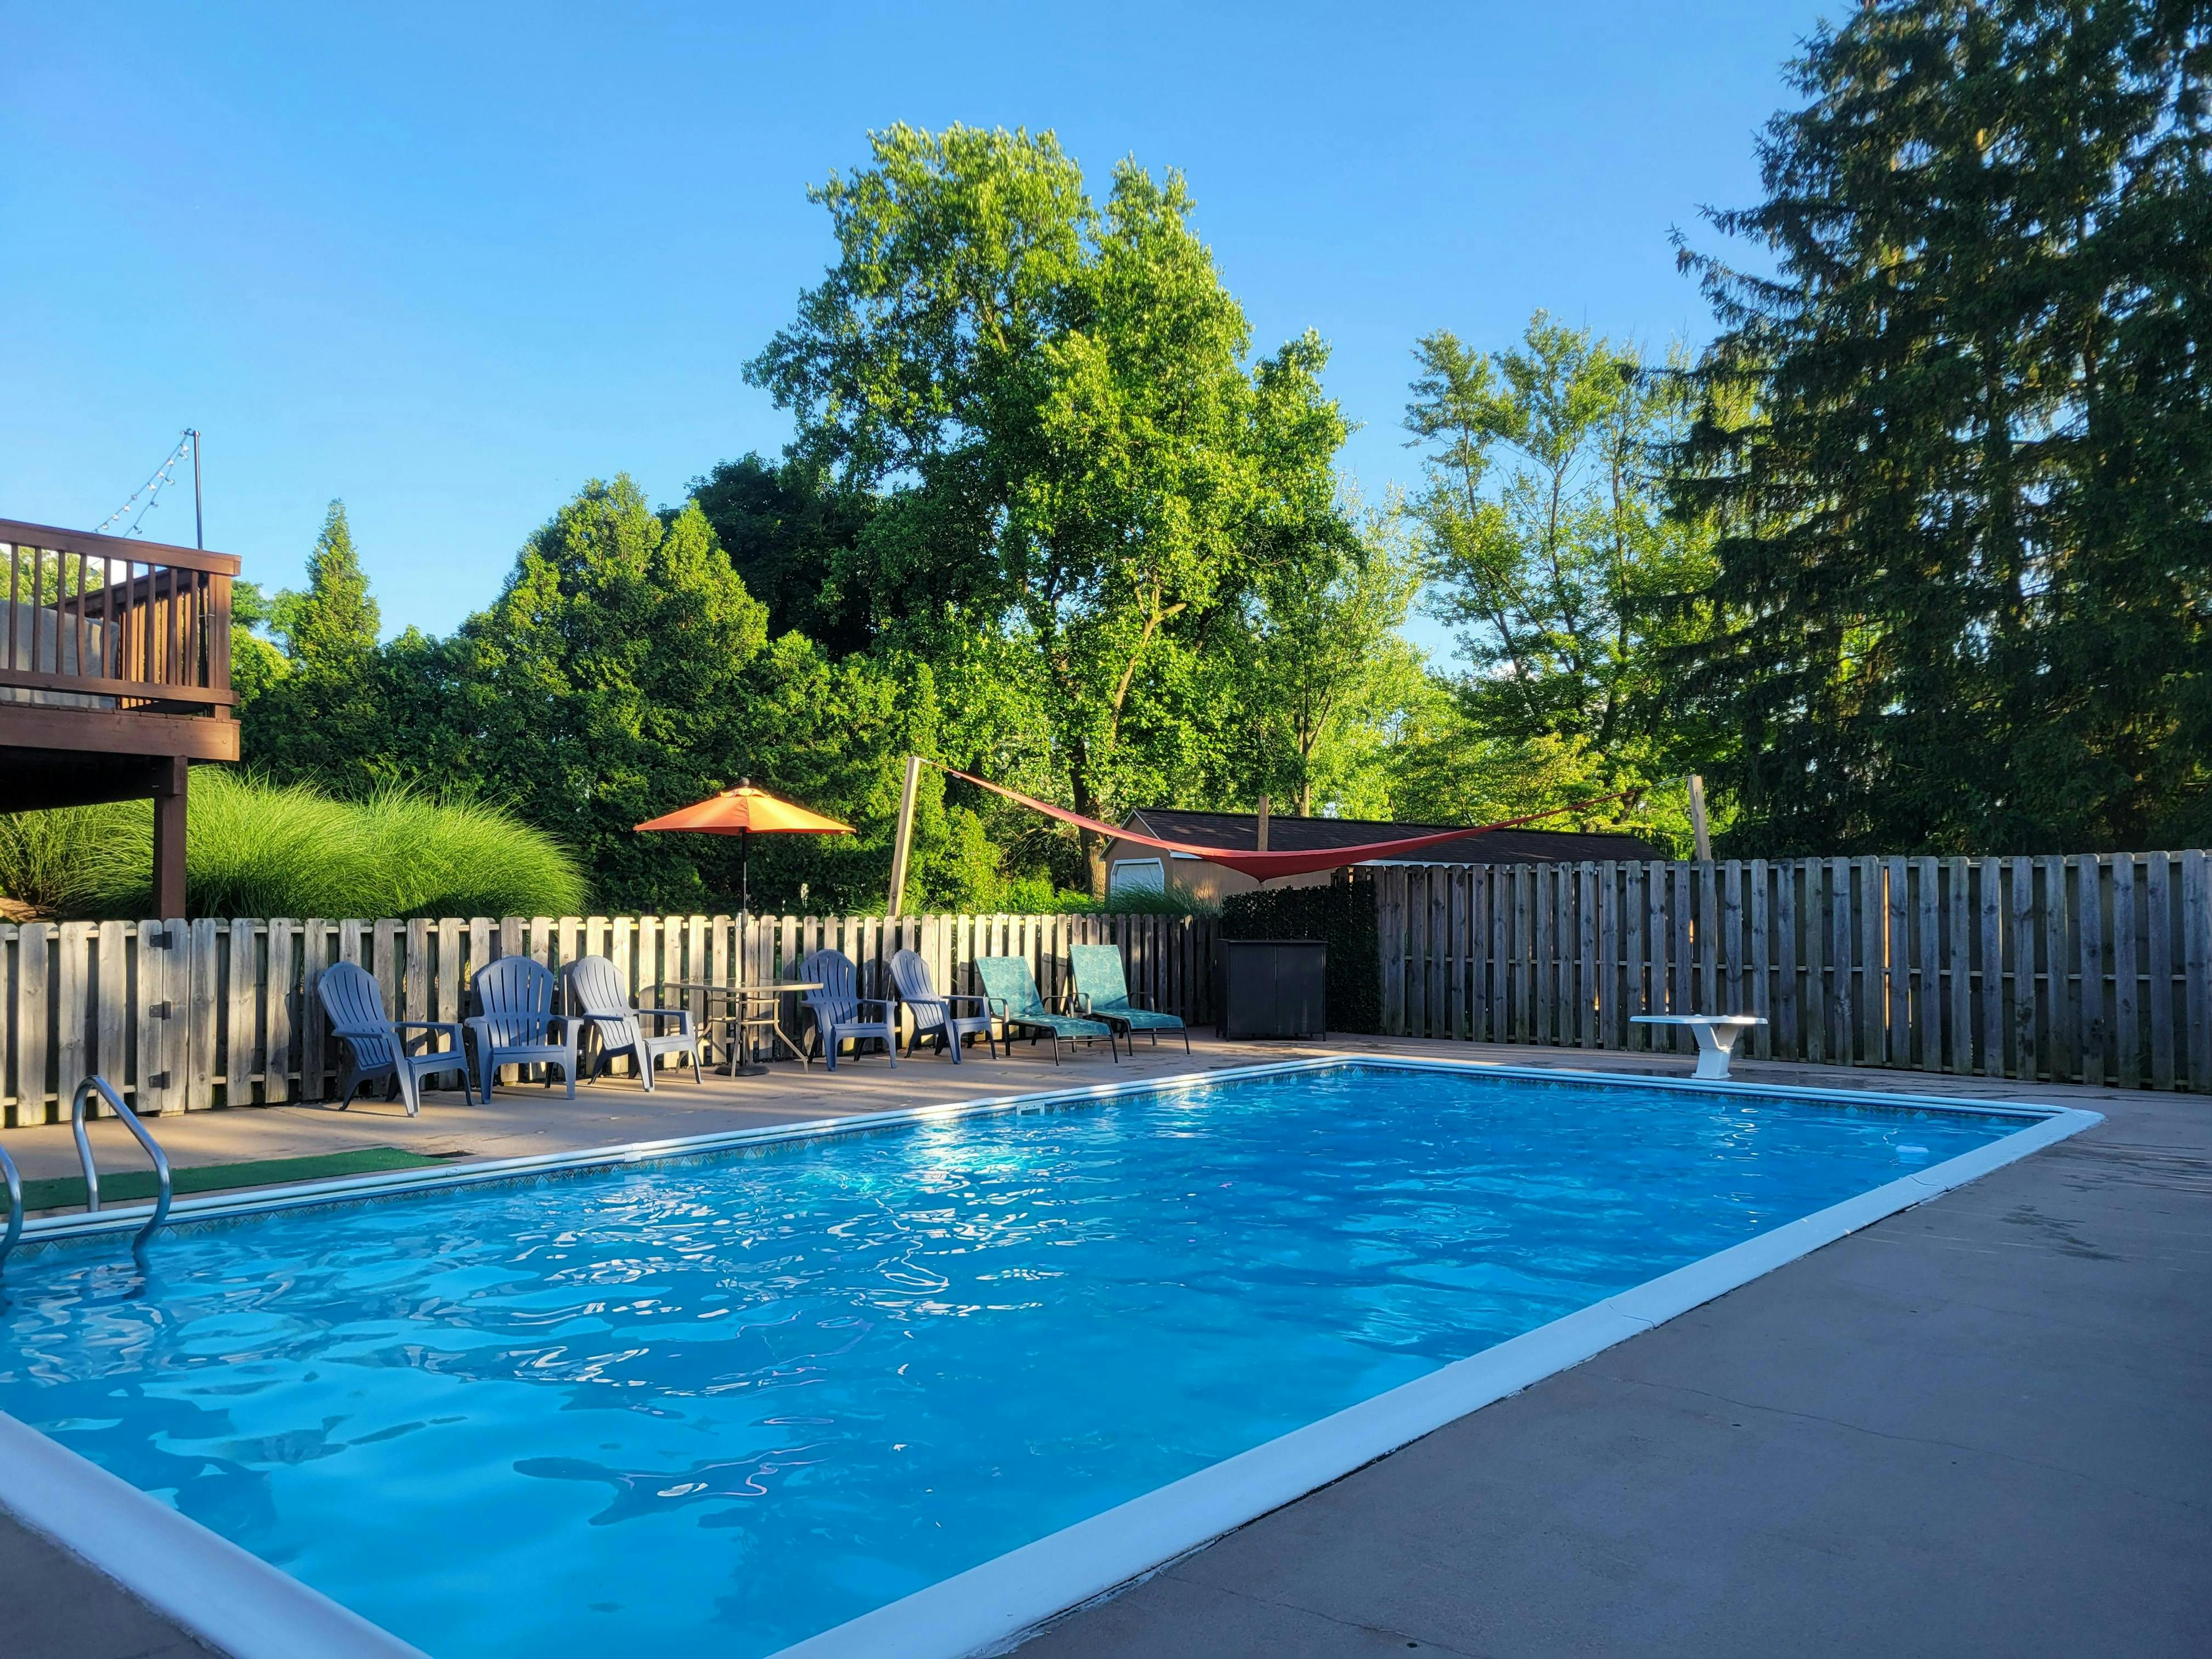 Amazing pool experience with a spectacular view.  Our pool is a fantastic option for Family and Friends to get together for a fun filled experience which was featured on Fox43.